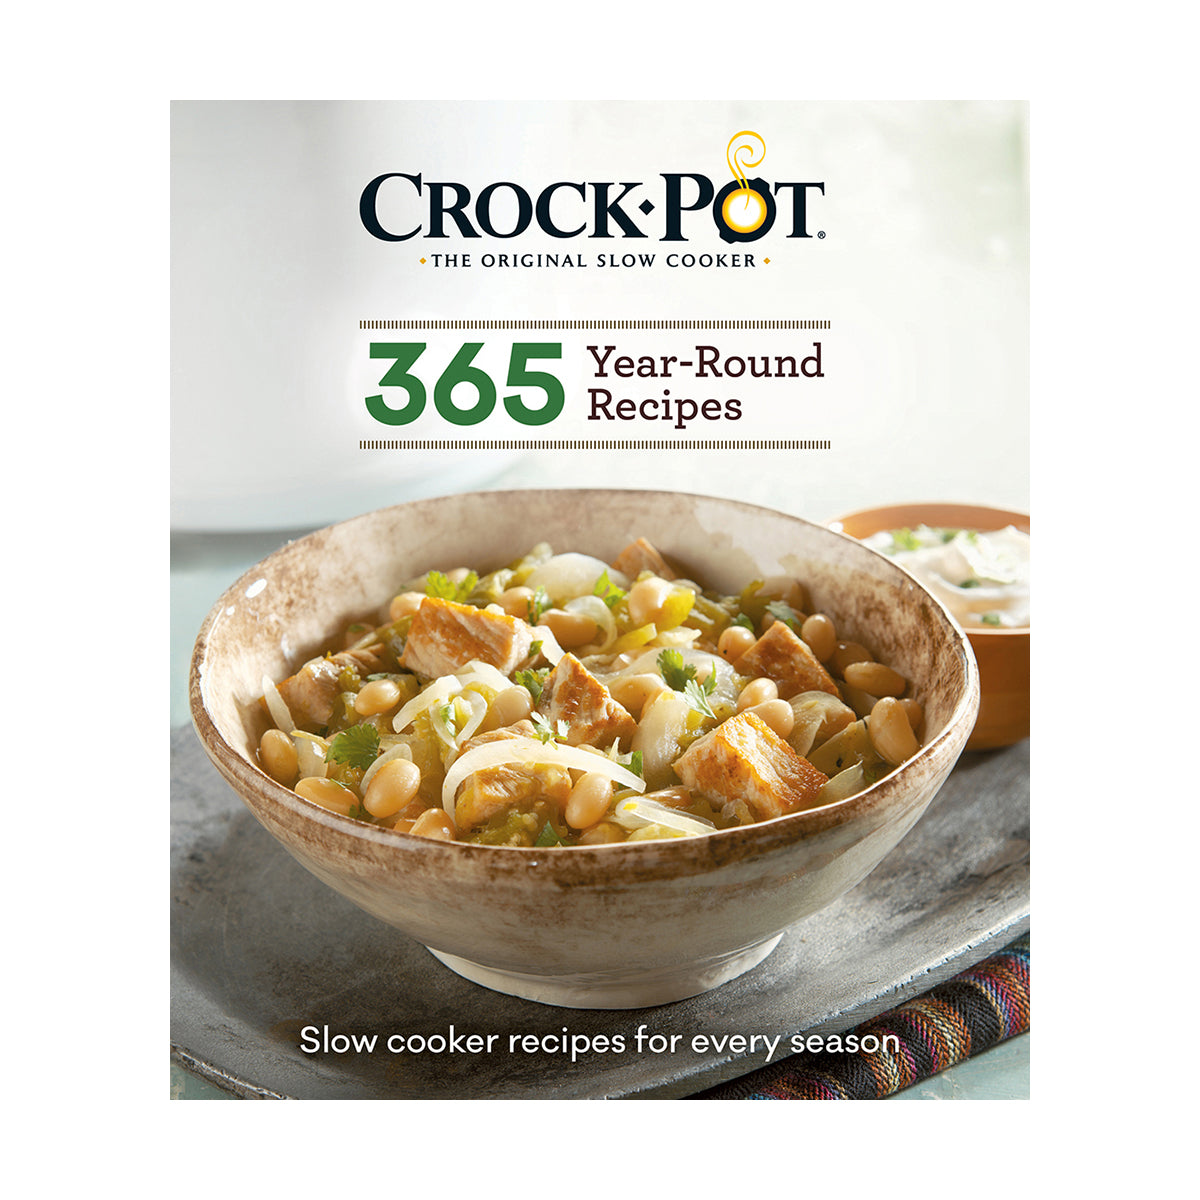 Crockpot 365 YearRound Recipes Slow Cooker Recipes for Every Season